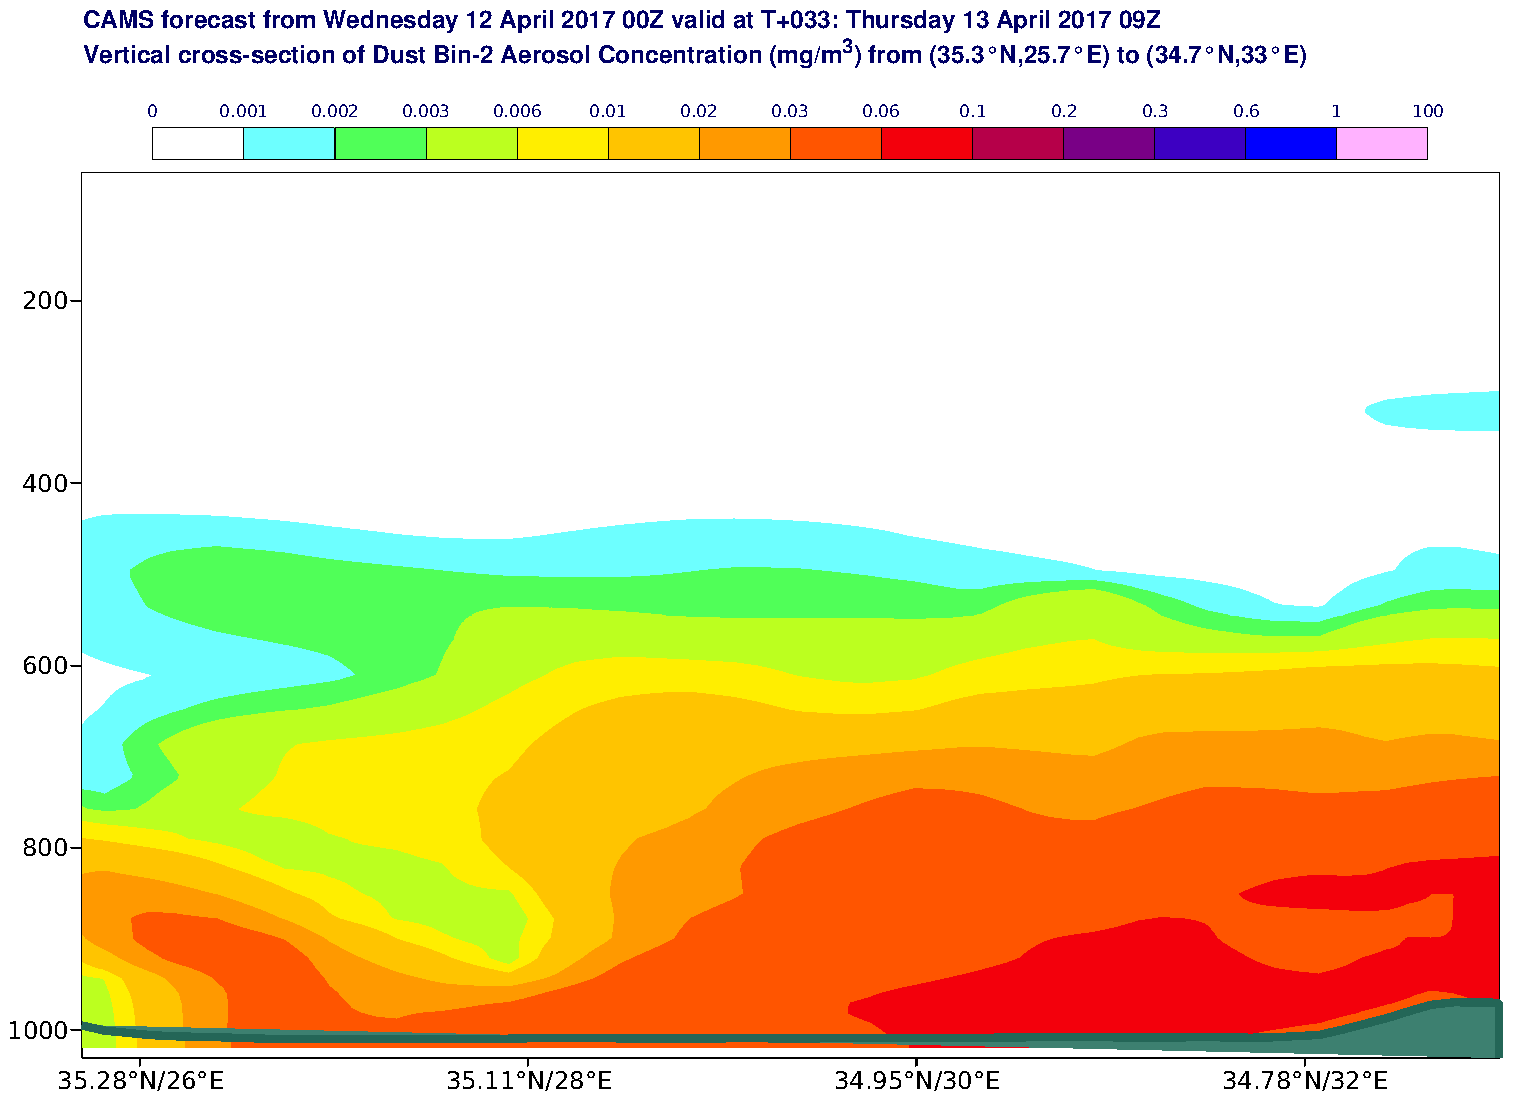 Vertical cross-section of Dust Bin-2 Aerosol Concentration (mg/m3) valid at T33 - 2017-04-13 09:00